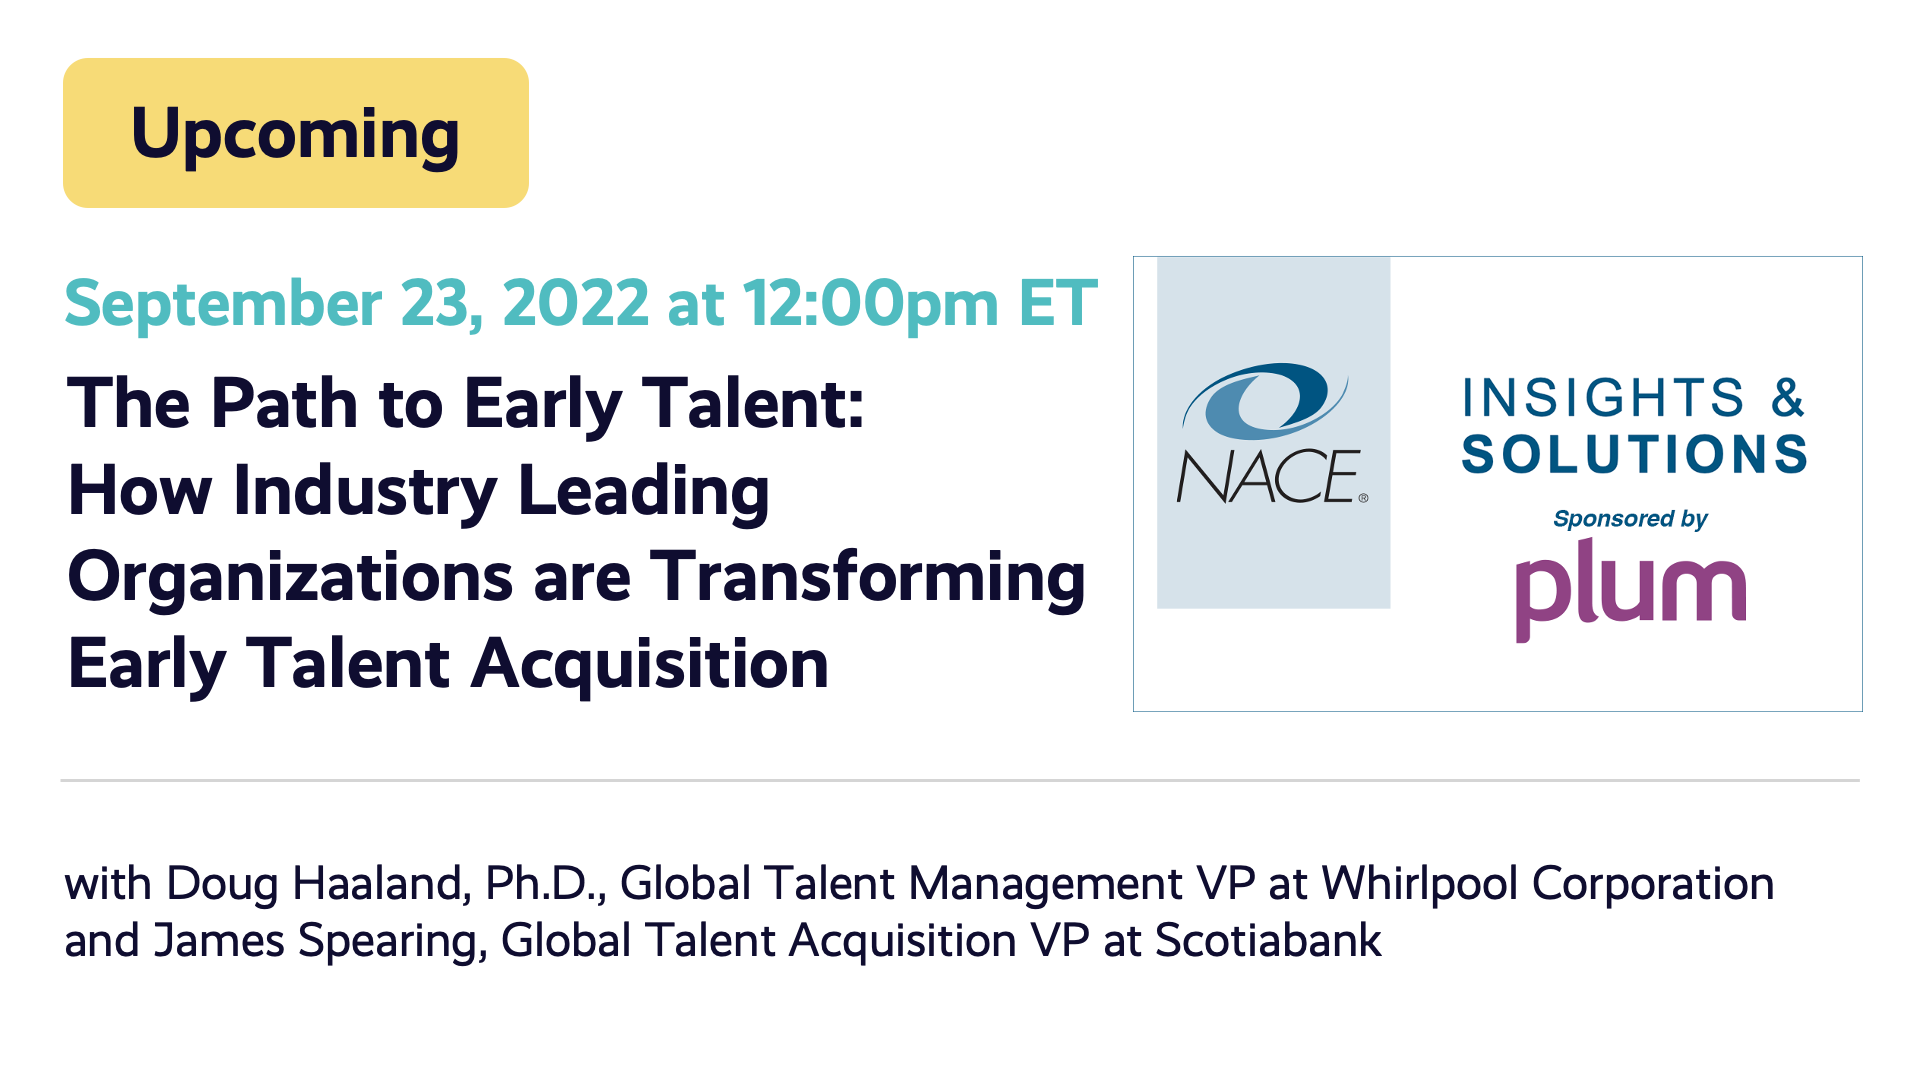 The Path to Early Talent: How Industry Leading Organizations are Transforming Early Talent Acquisition